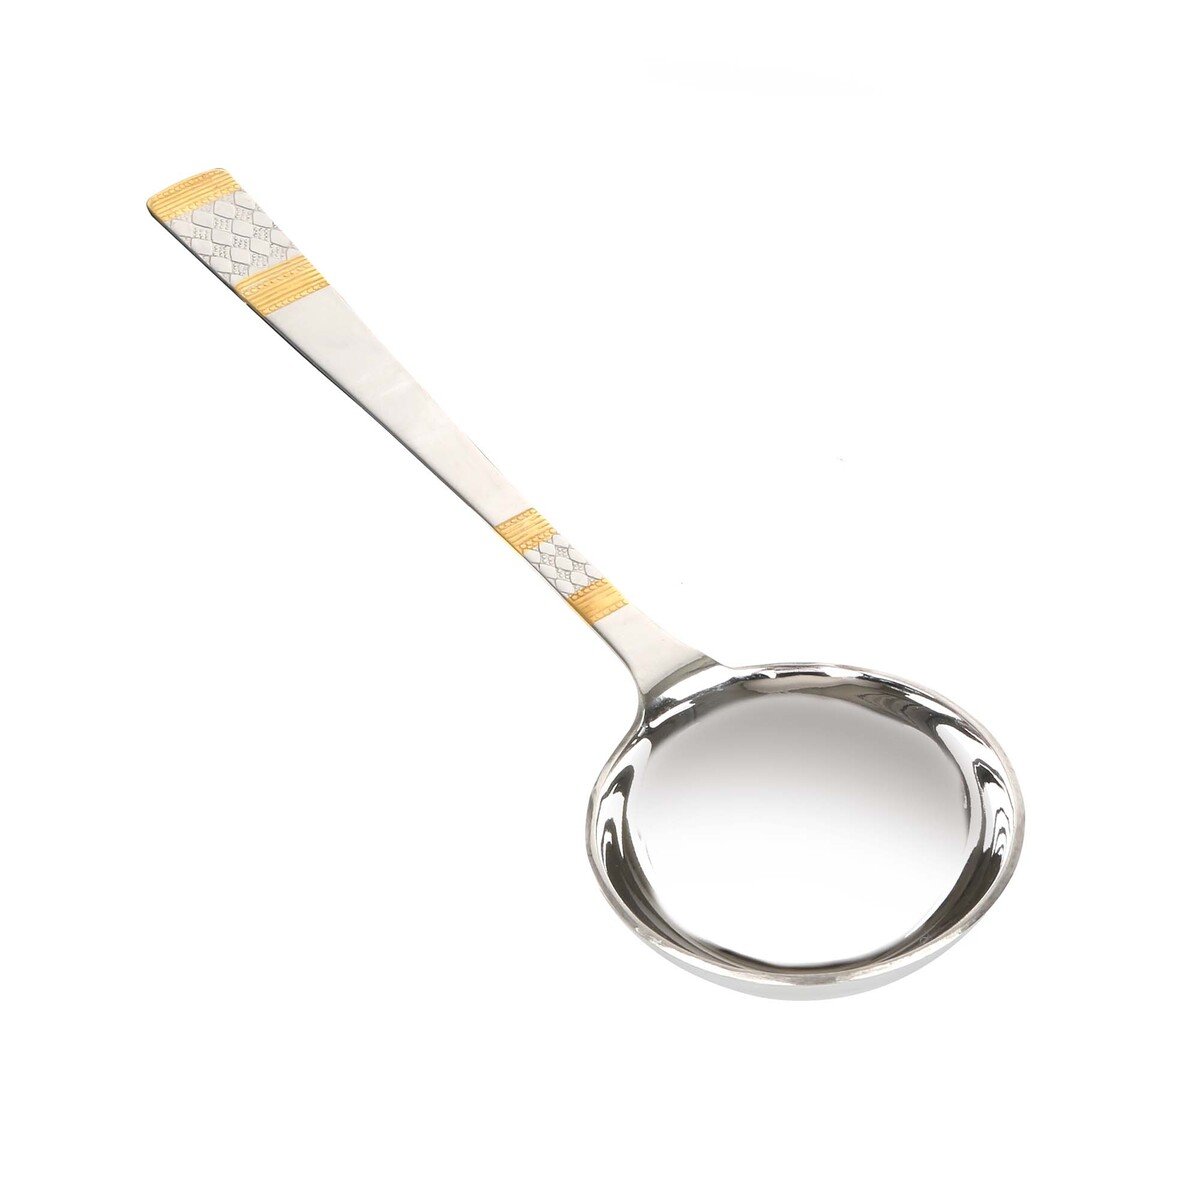 Chefline Stainless Steel Ladle GSGOLD